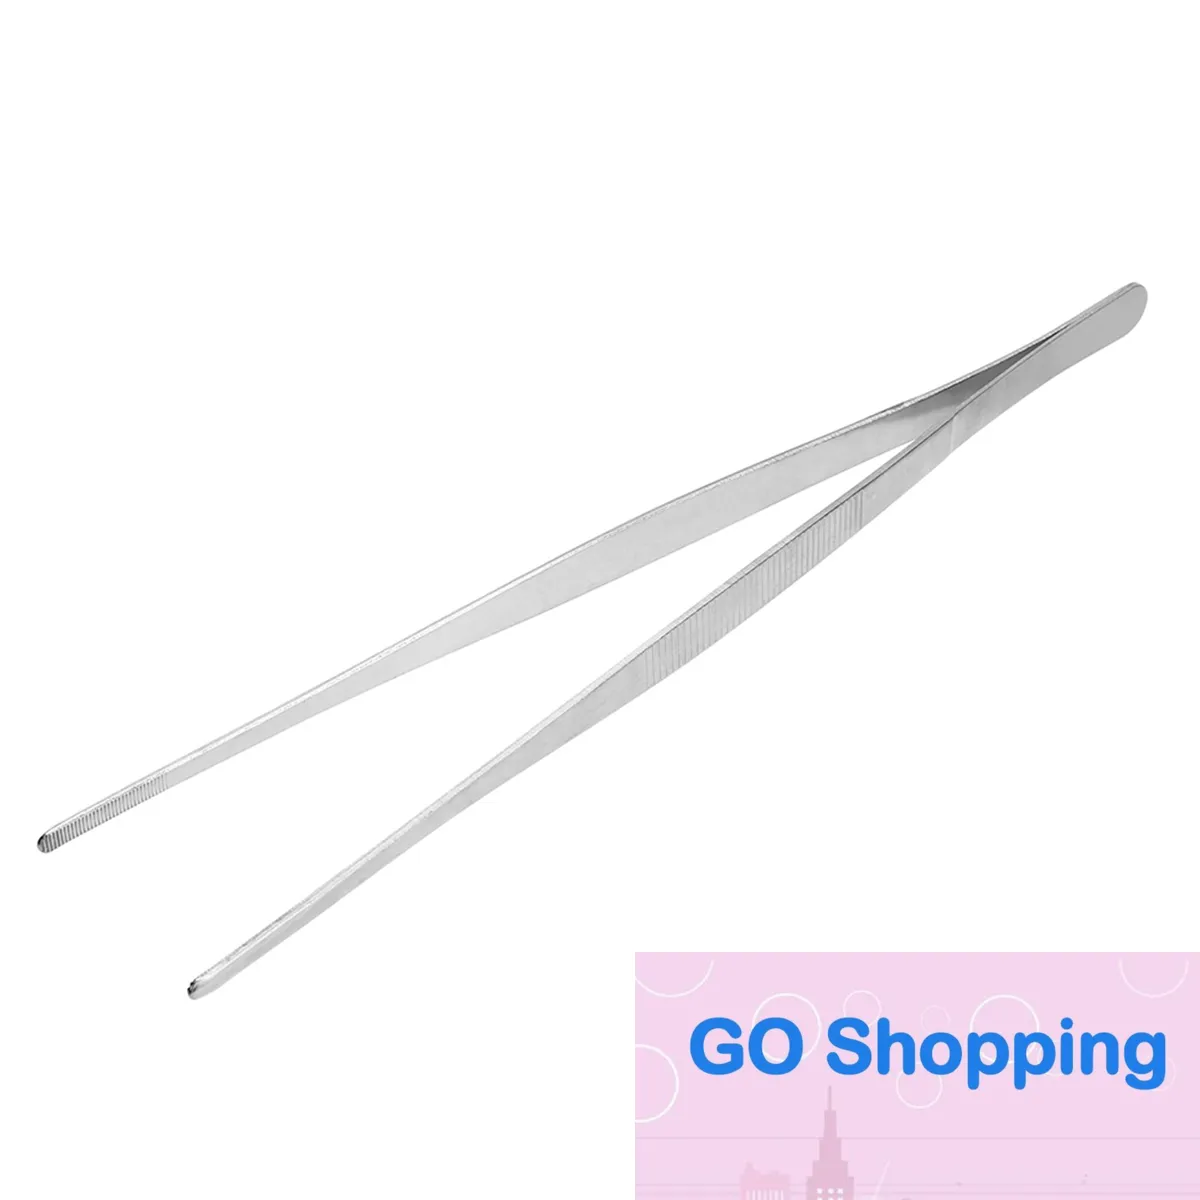 All-match 30cm Long Stainless Steel Tongs Clip Straight Kitchen Tweezers Food Pliers Multi DIY Model Making Soldering Barbecue BBQ